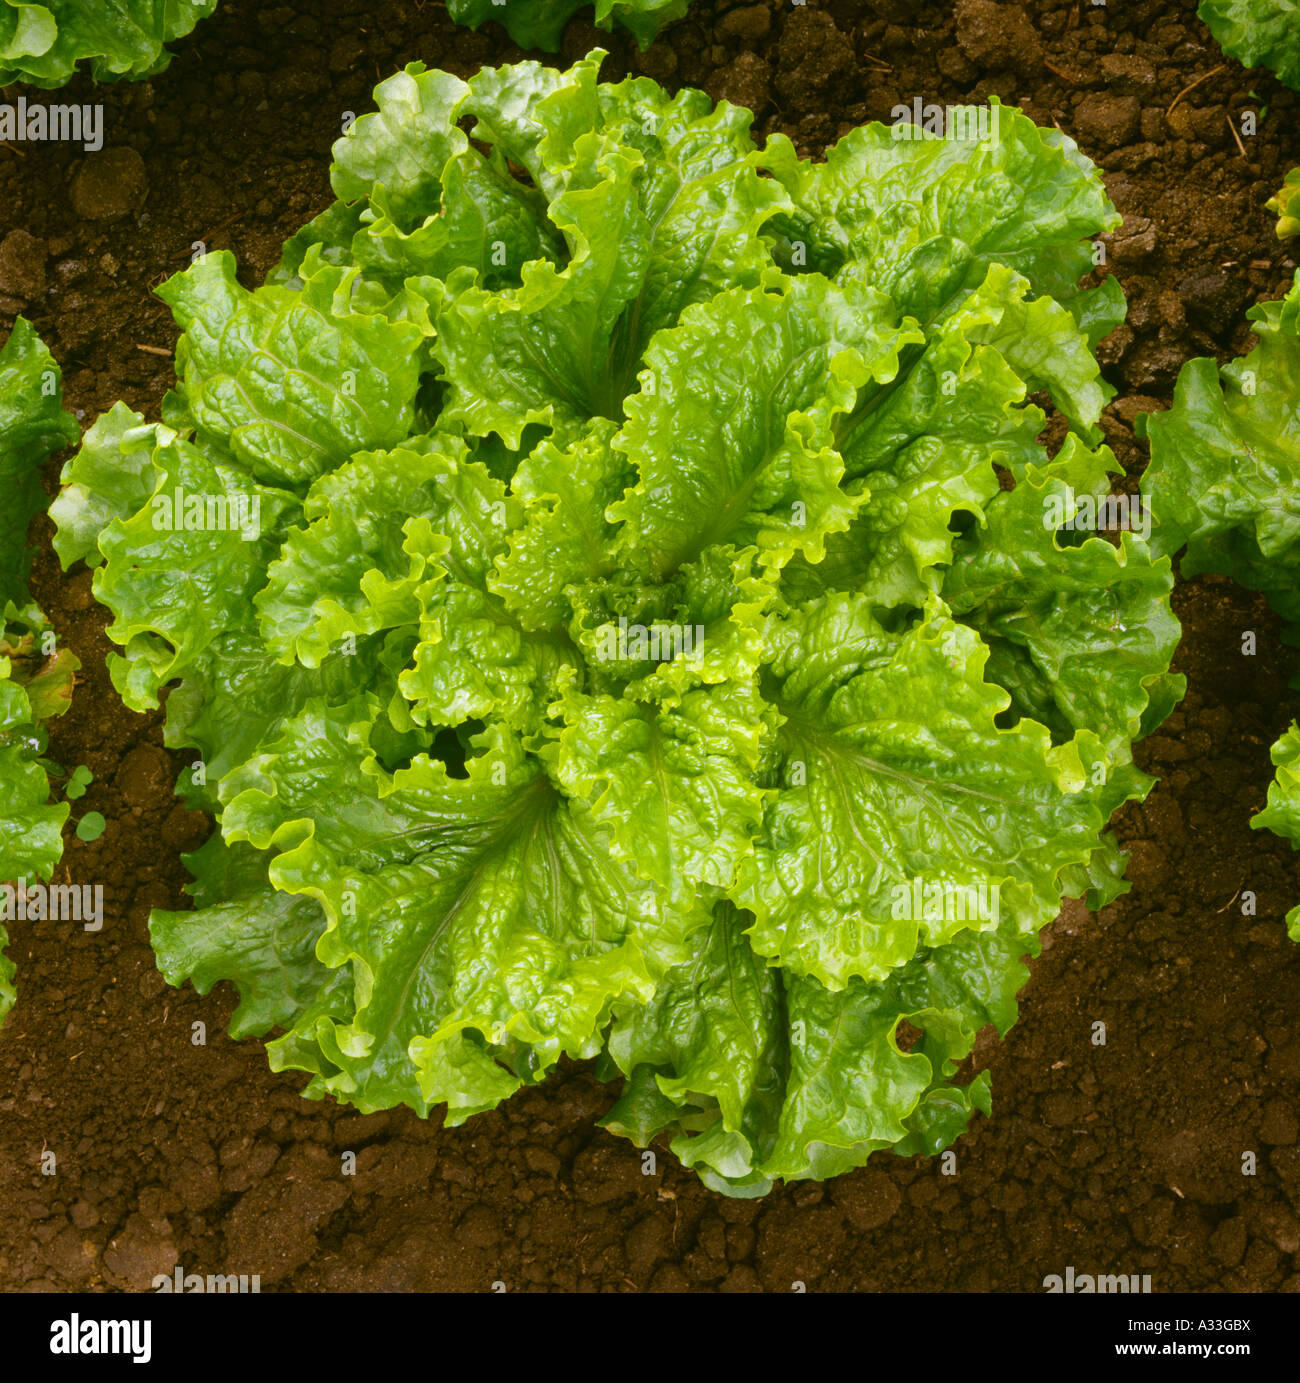 Agriculture Closeup Of A Mature Head Of Organic Green Leaf Lettuce Stock Photo Alamy